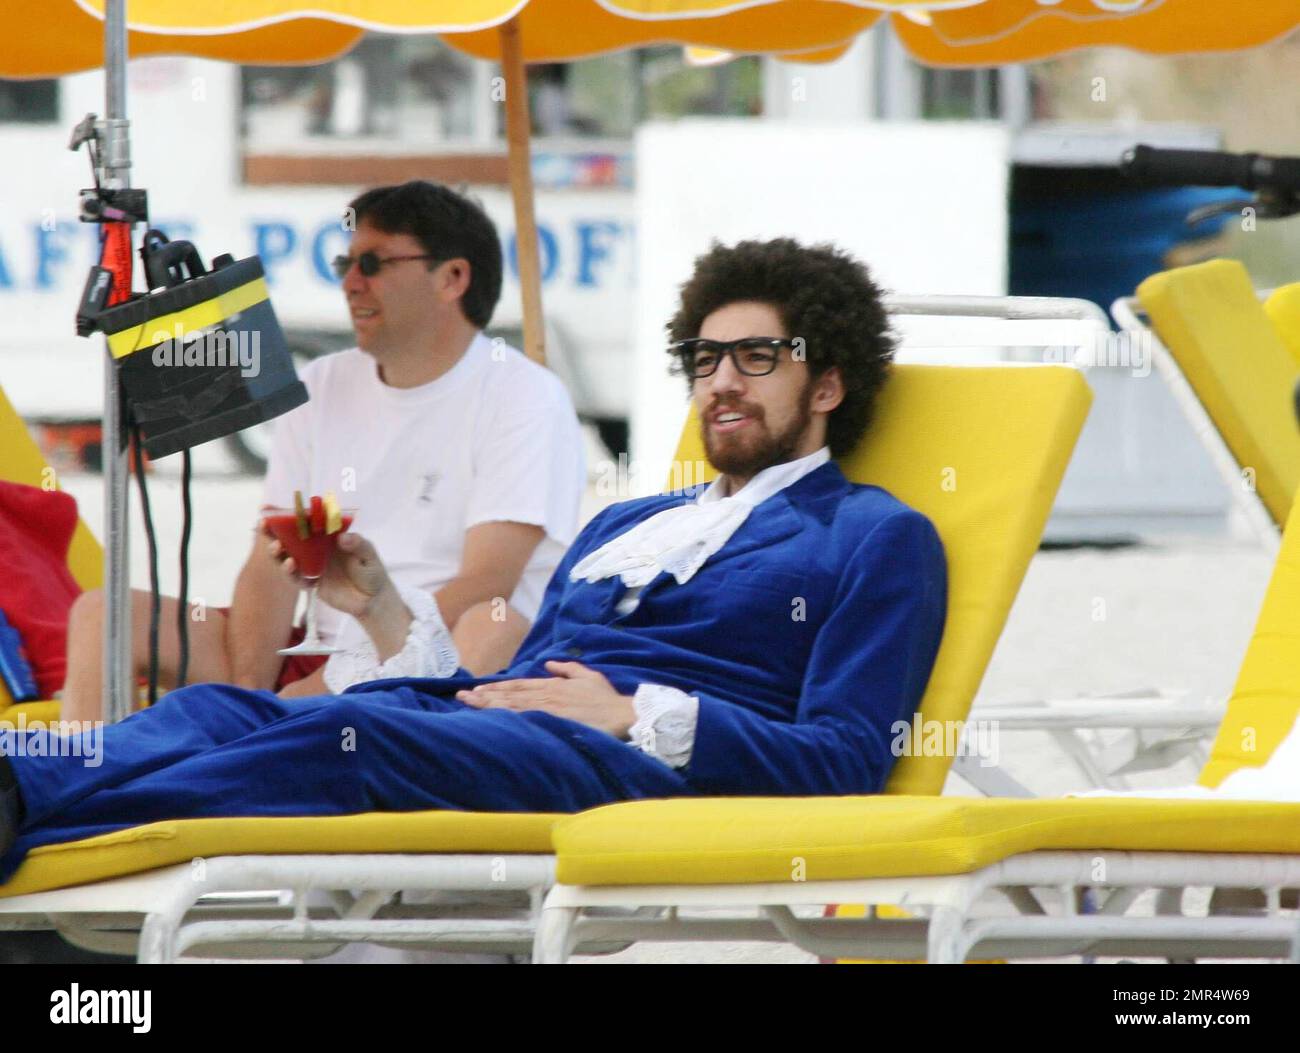 Gnarls Barkley hit Miami Beach for a photo shoot. The Crazy pair posed as Austin Powers and Dr Evil while sipping cocktails and playing with beach toys before heading off to play at Miami's all day Bang Festival, 11/11/06 Stock Photo